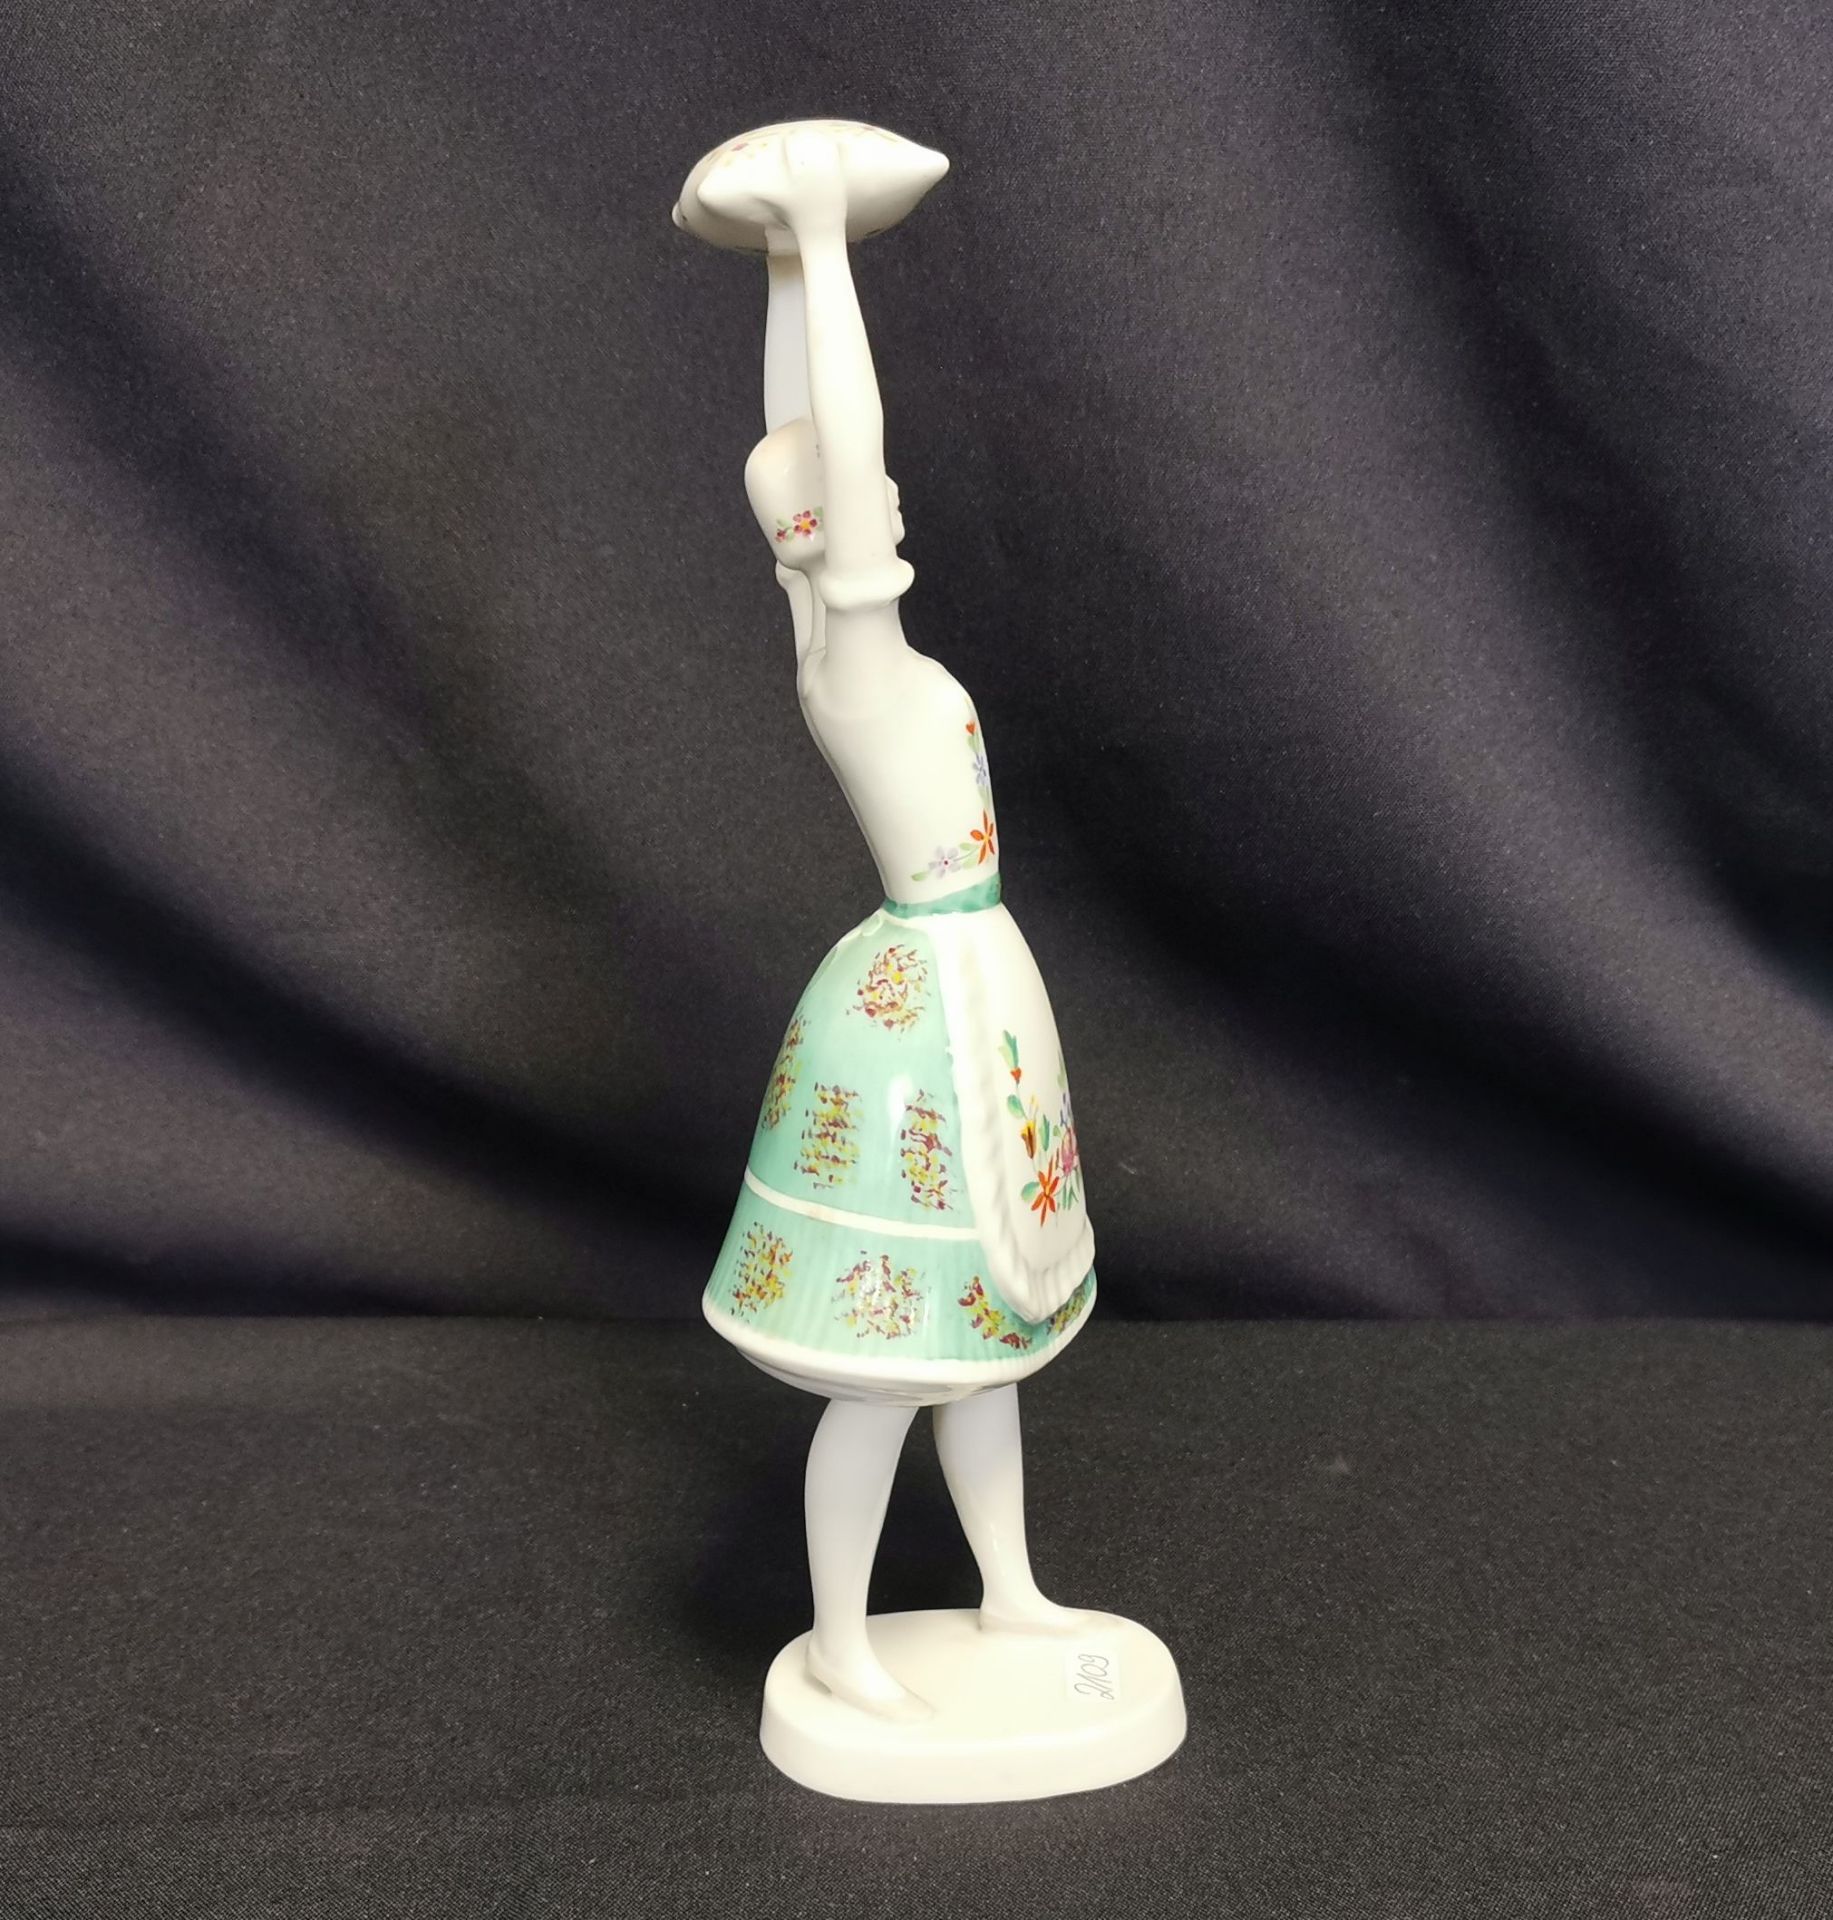 PORCELAIN FIGURINE "WOMAN IN TRADITIONAL COSTUME" - Image 4 of 5